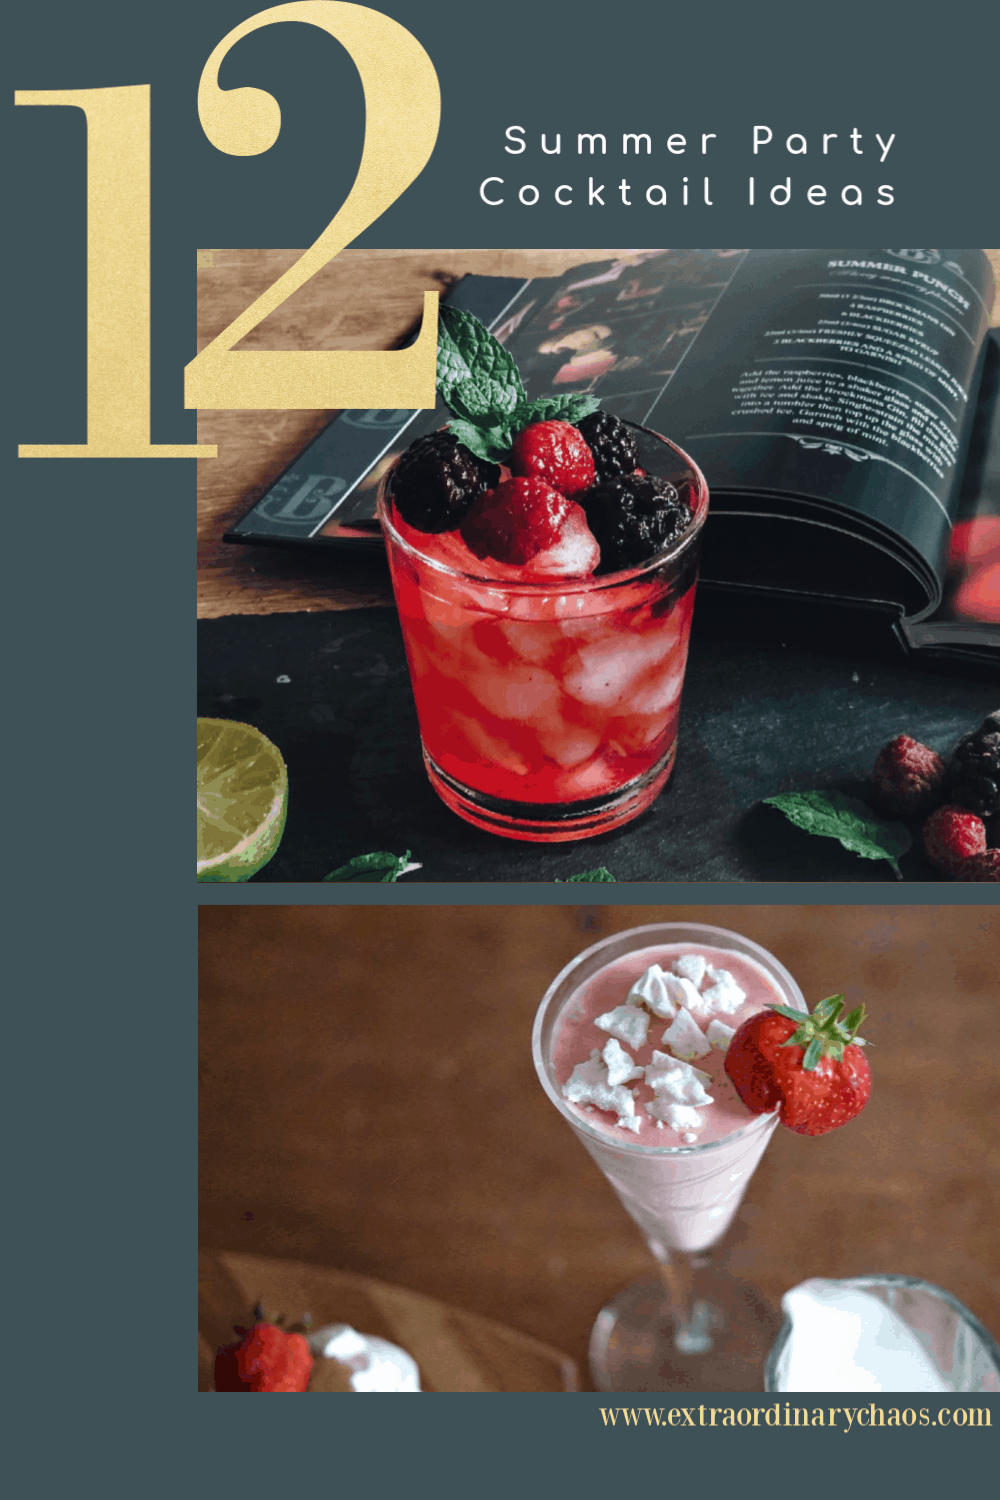 Summer Party Cocktail Ideas to make the best cocktails #cocktailrecipes #cocktails #summercocktails #partyideas